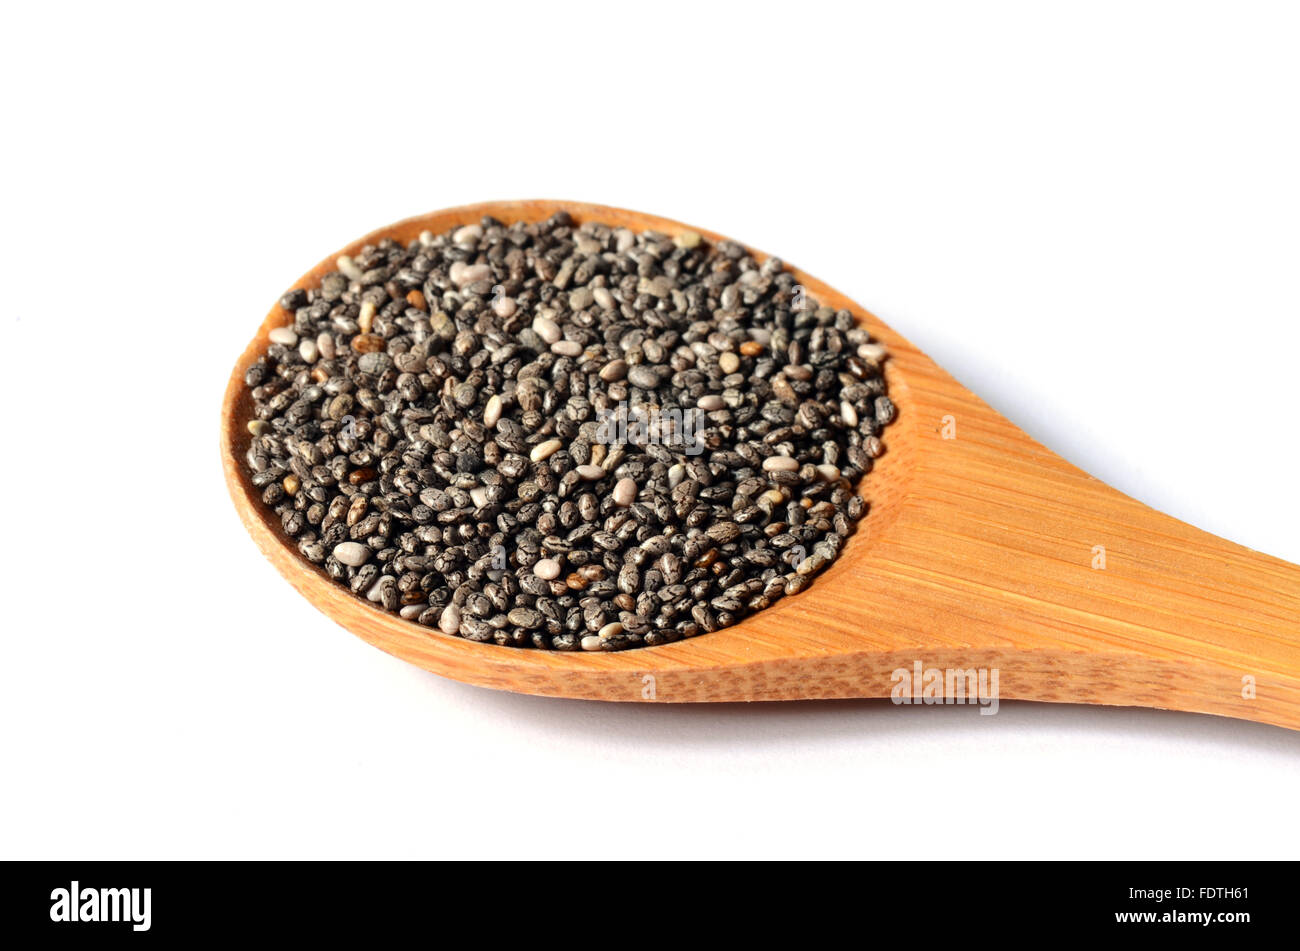 Black chia seeds, healthy and nutritious super food Stock Photo